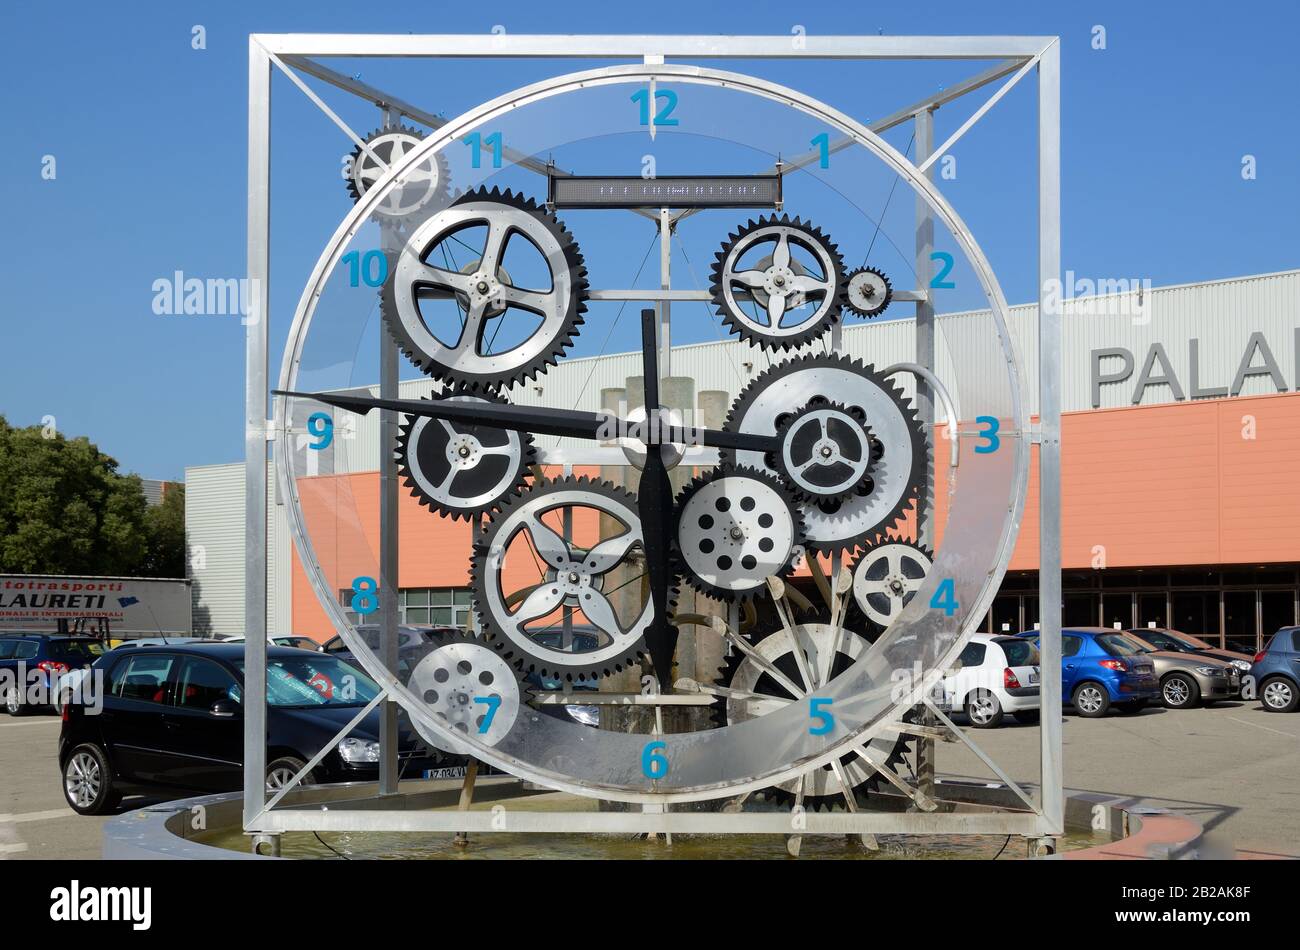 Mechanical Water Clock or Time Piece Contraption Using Flowing Water & Series of Cogs Stock Photo